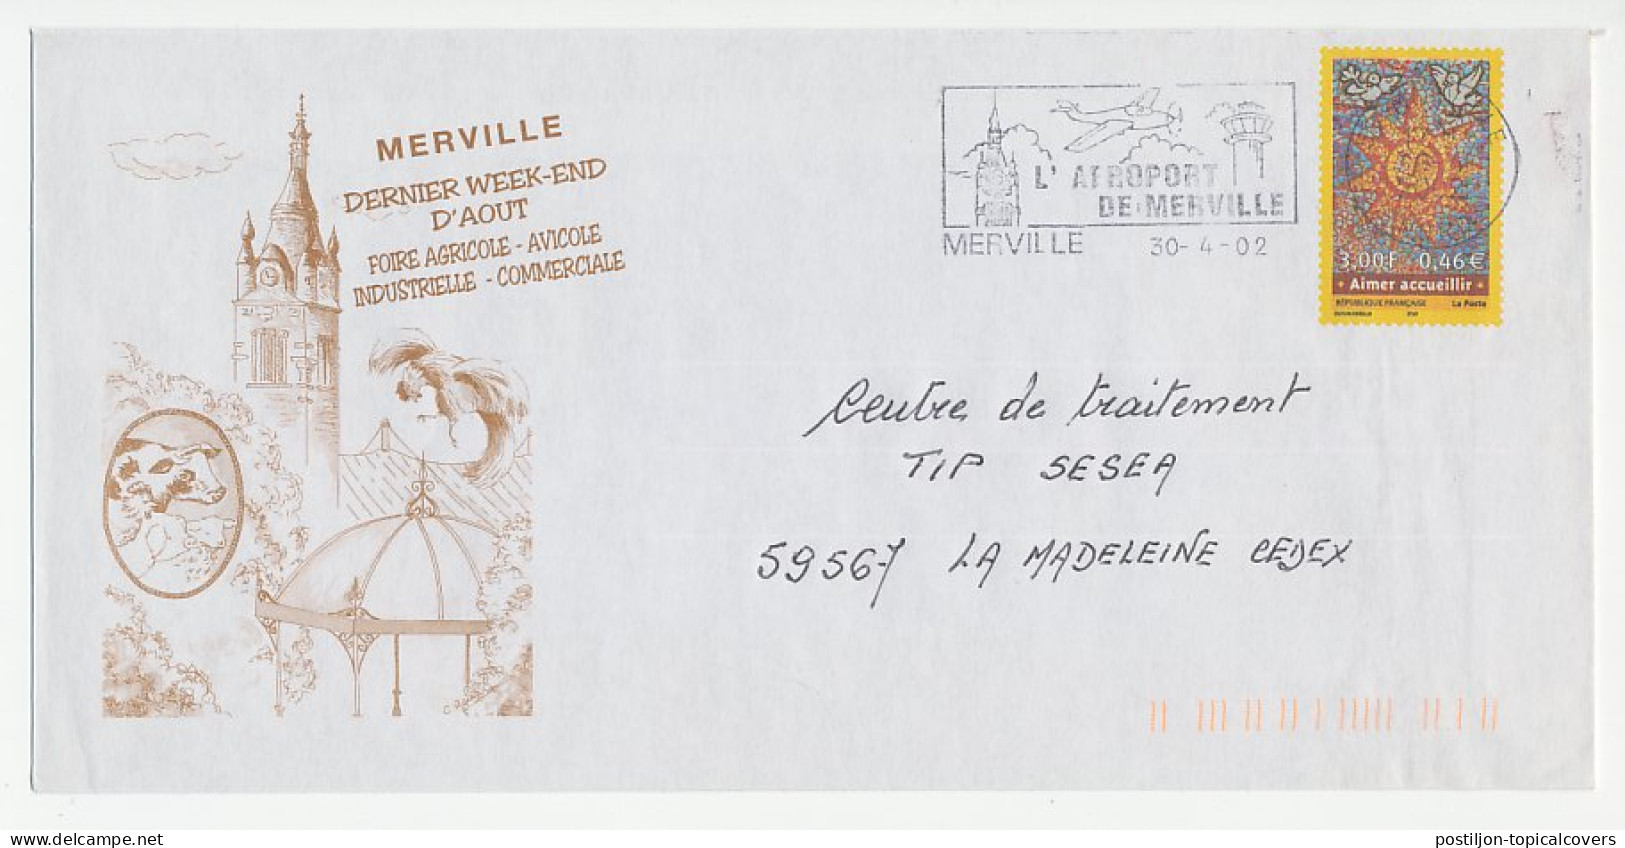 Postal Stationery / PAP France 2002 Fair - Agriculture - Poultry - Ferme